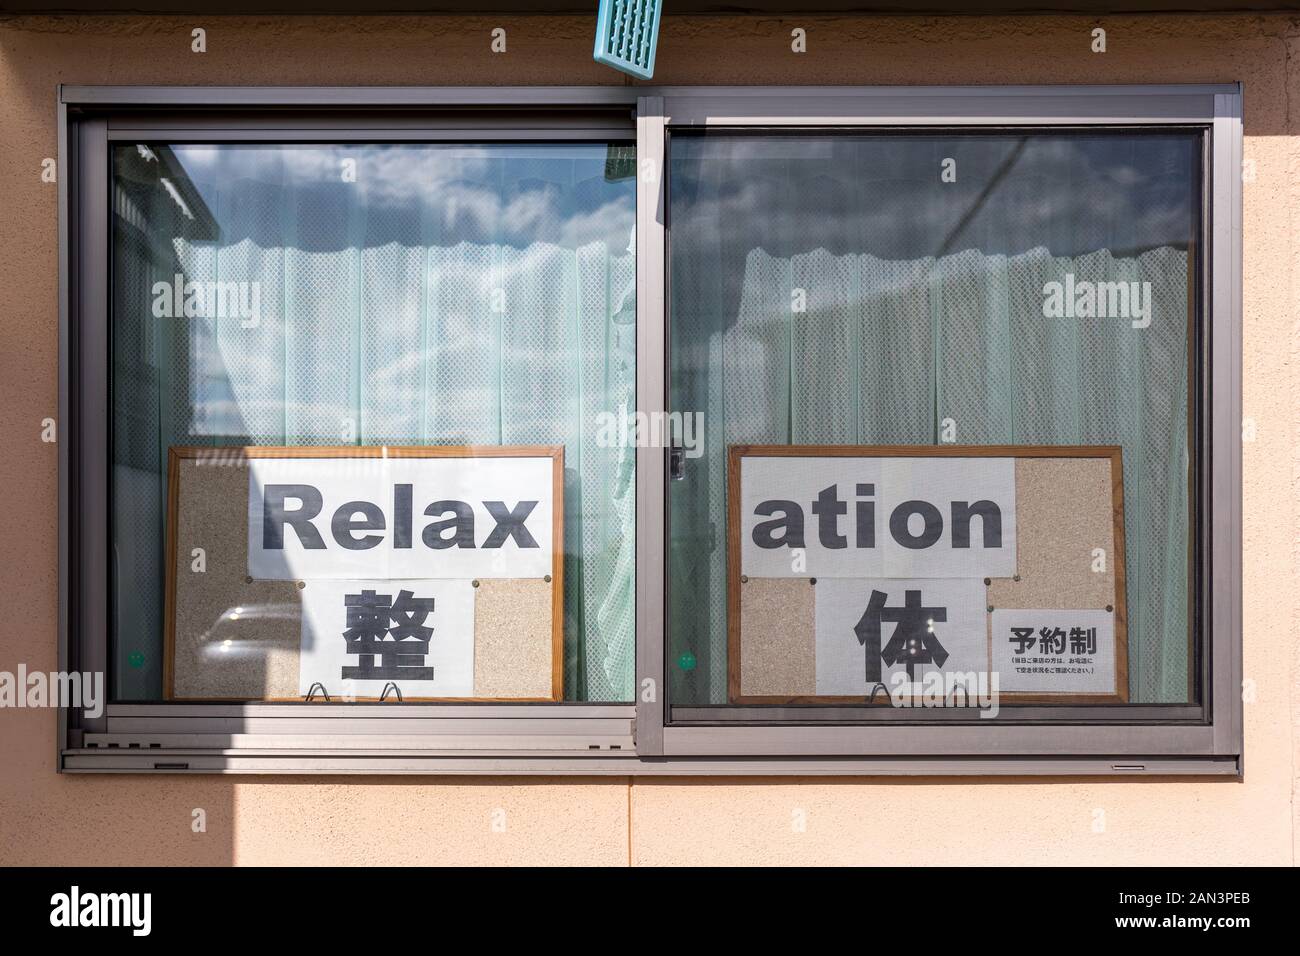 'Relax' 'ation' – relaxation sign split across two windows; Japanese and English Stock Photo